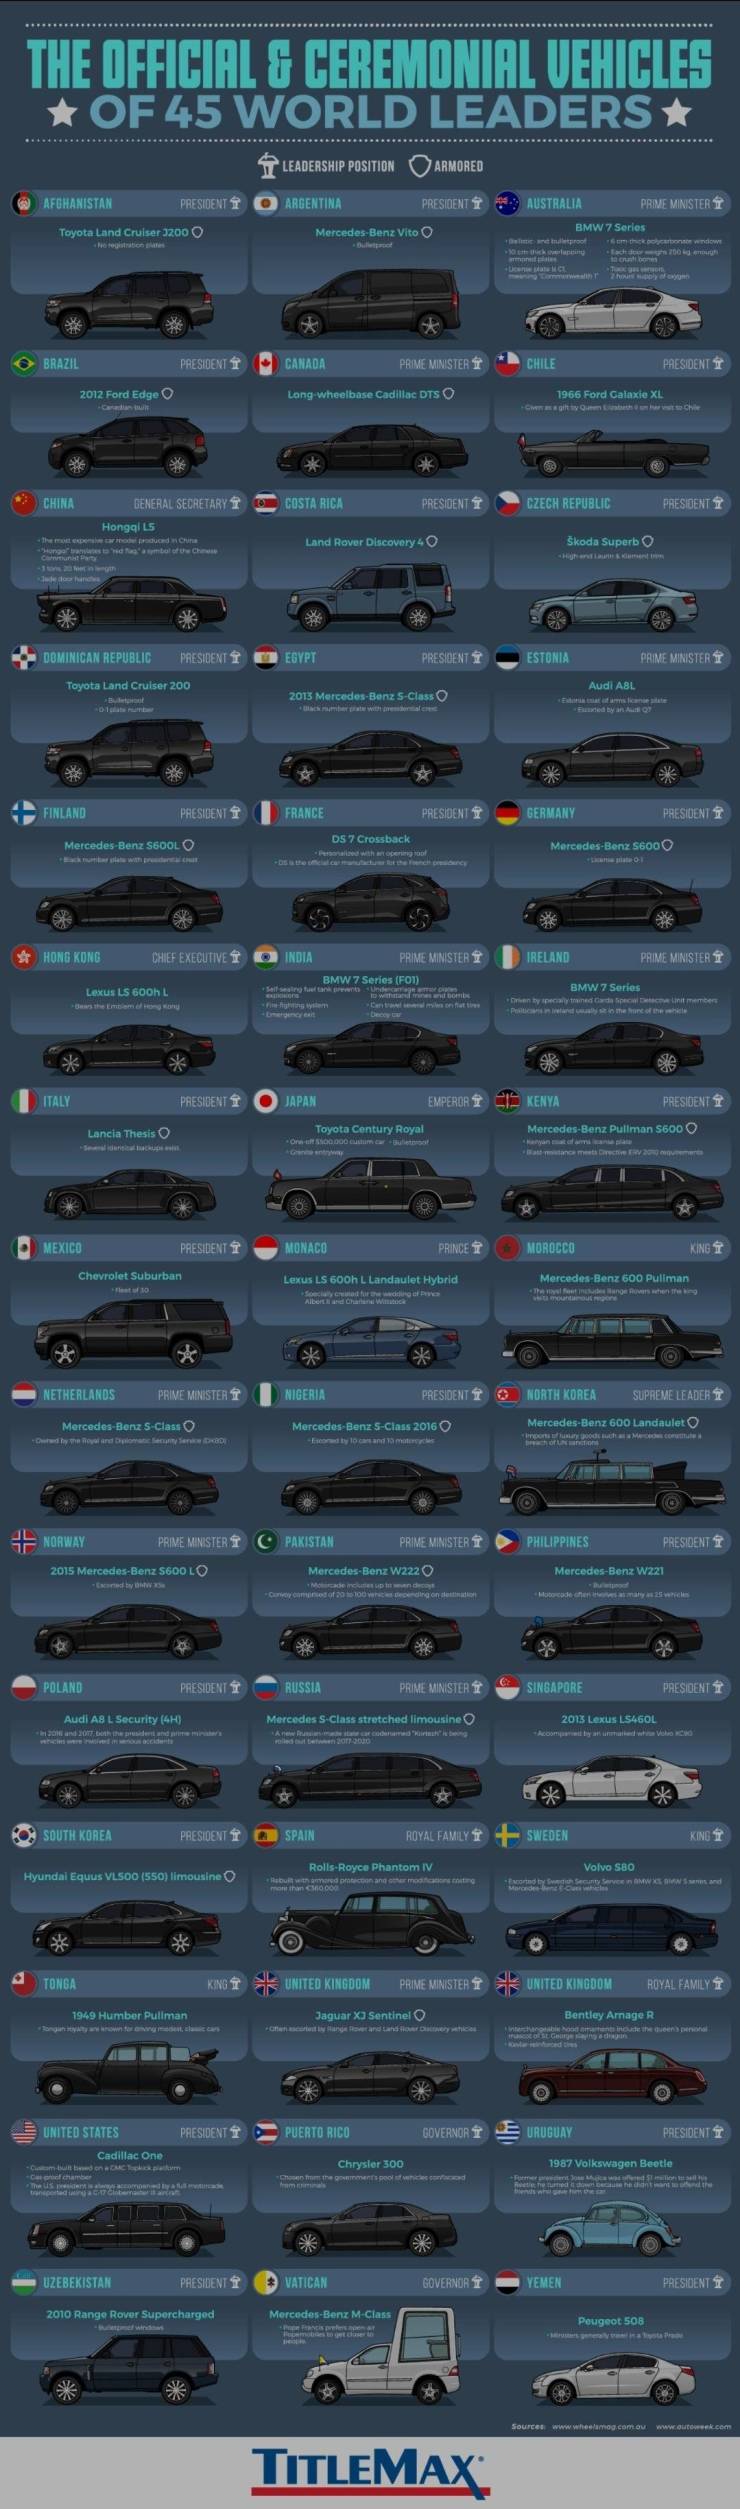 titlemax - The Official & Ceremonial Vehicles Of 45 World Leaders Leadership Position Armored Afghanistan President 1 O Argentina President T Australia Prime Ministert Toyota Land Cruiser 3200 MercedesBenz Vito O Bmw 7 Series for the one window to be Te O